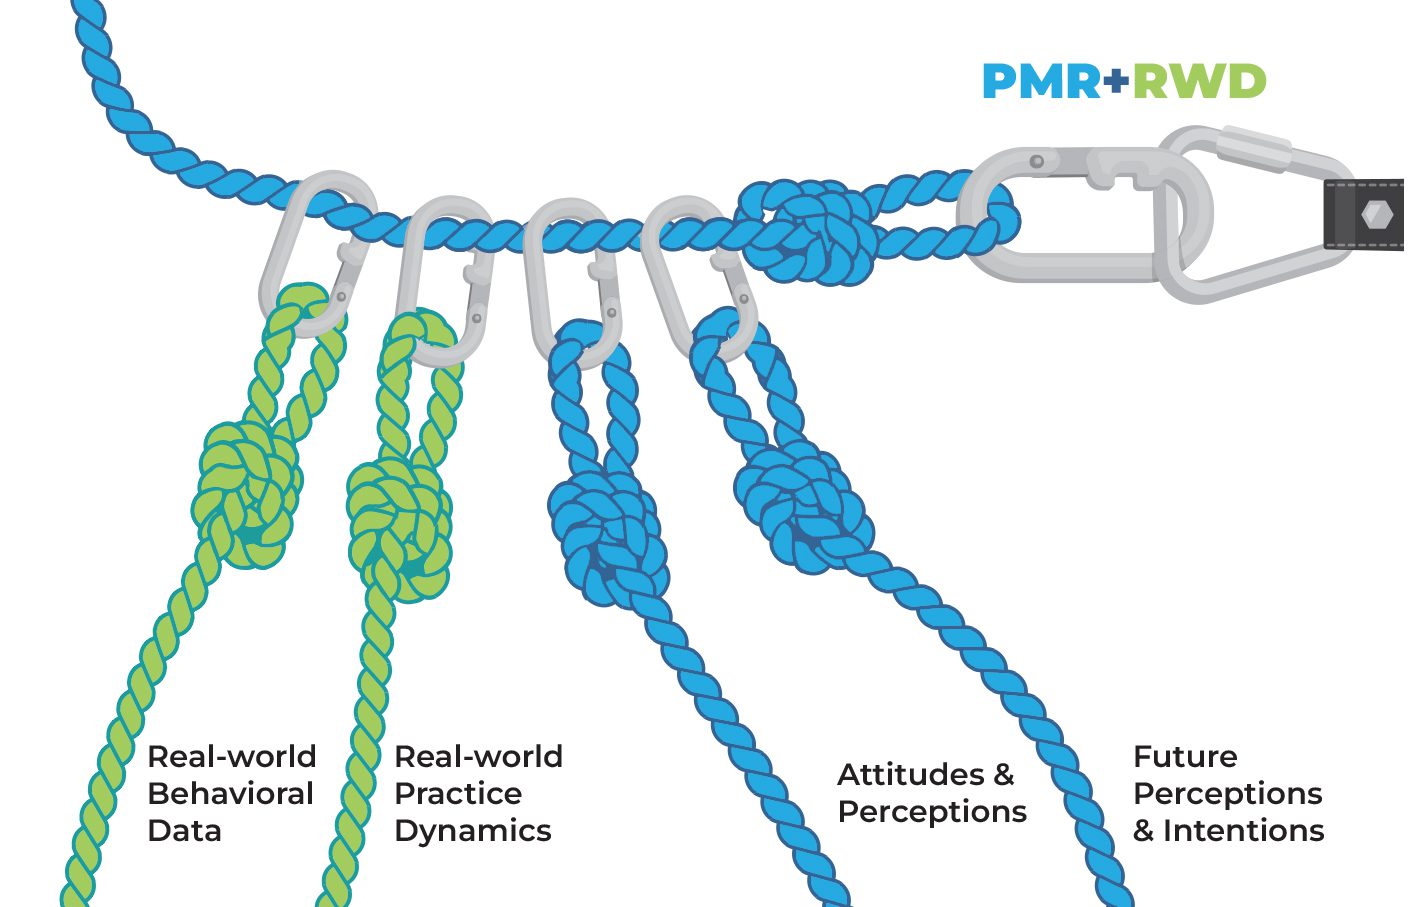 PMR and RWD, combining real-world behavioral data, real-world practice dynamics, attitudes and perceptions, and future perceptions and intentions